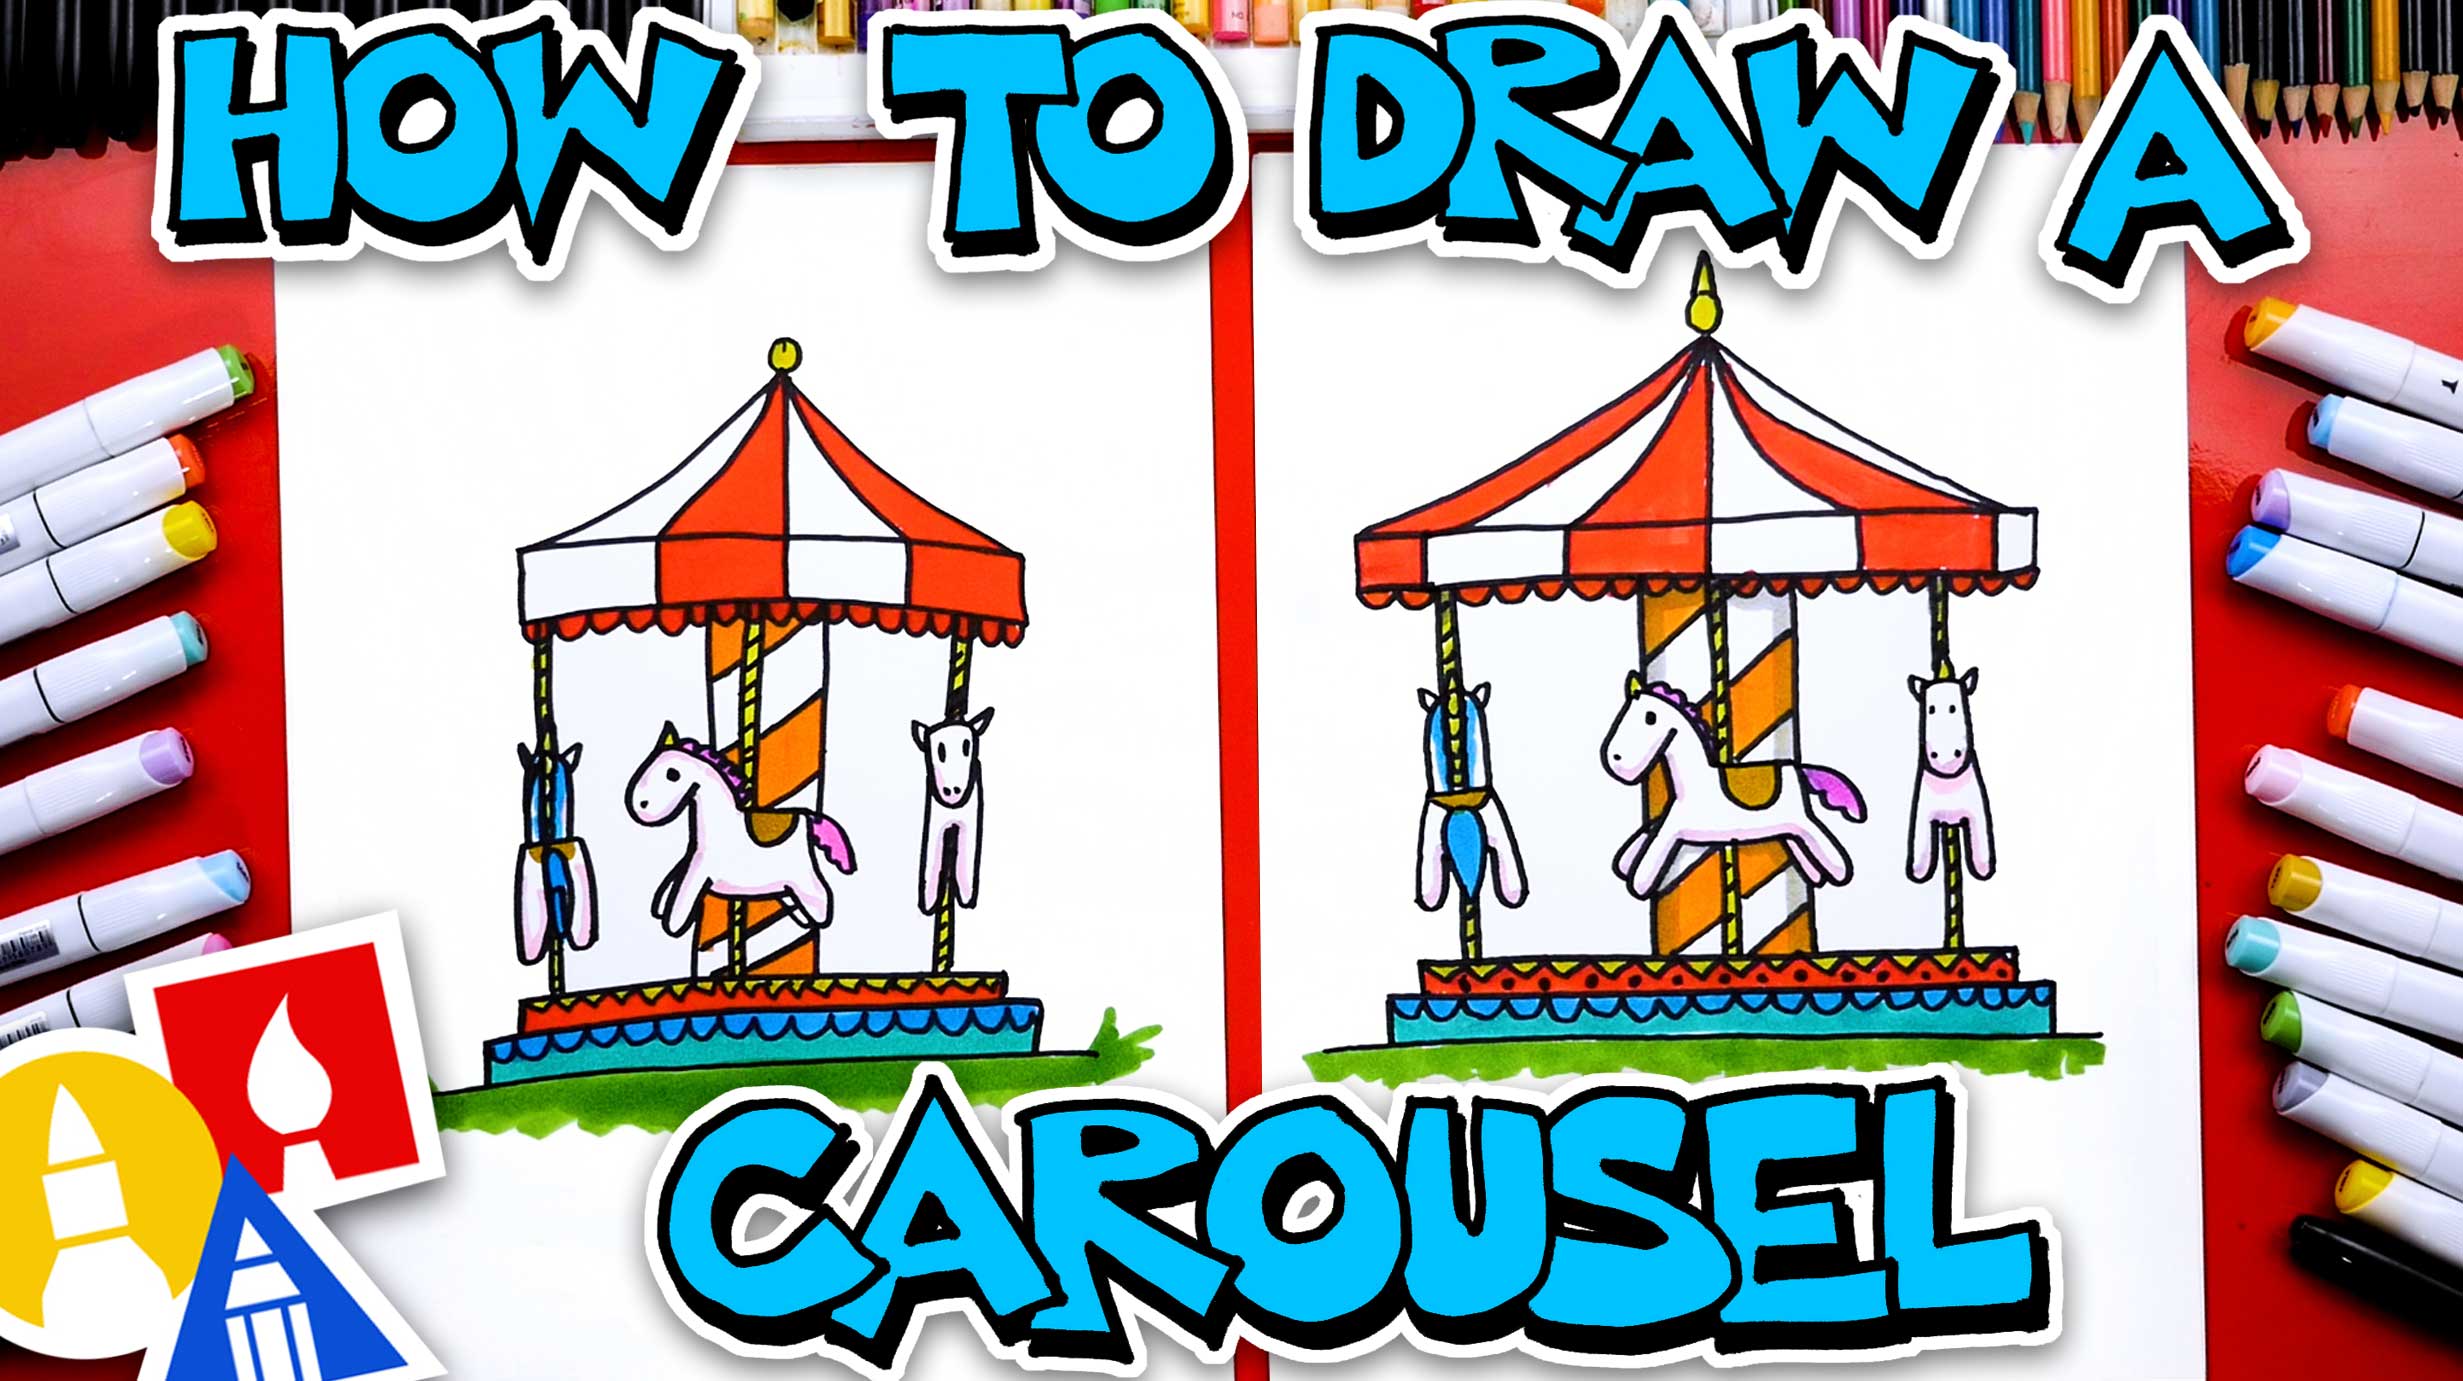 How To Draw A Carousel Art For Kids Hub